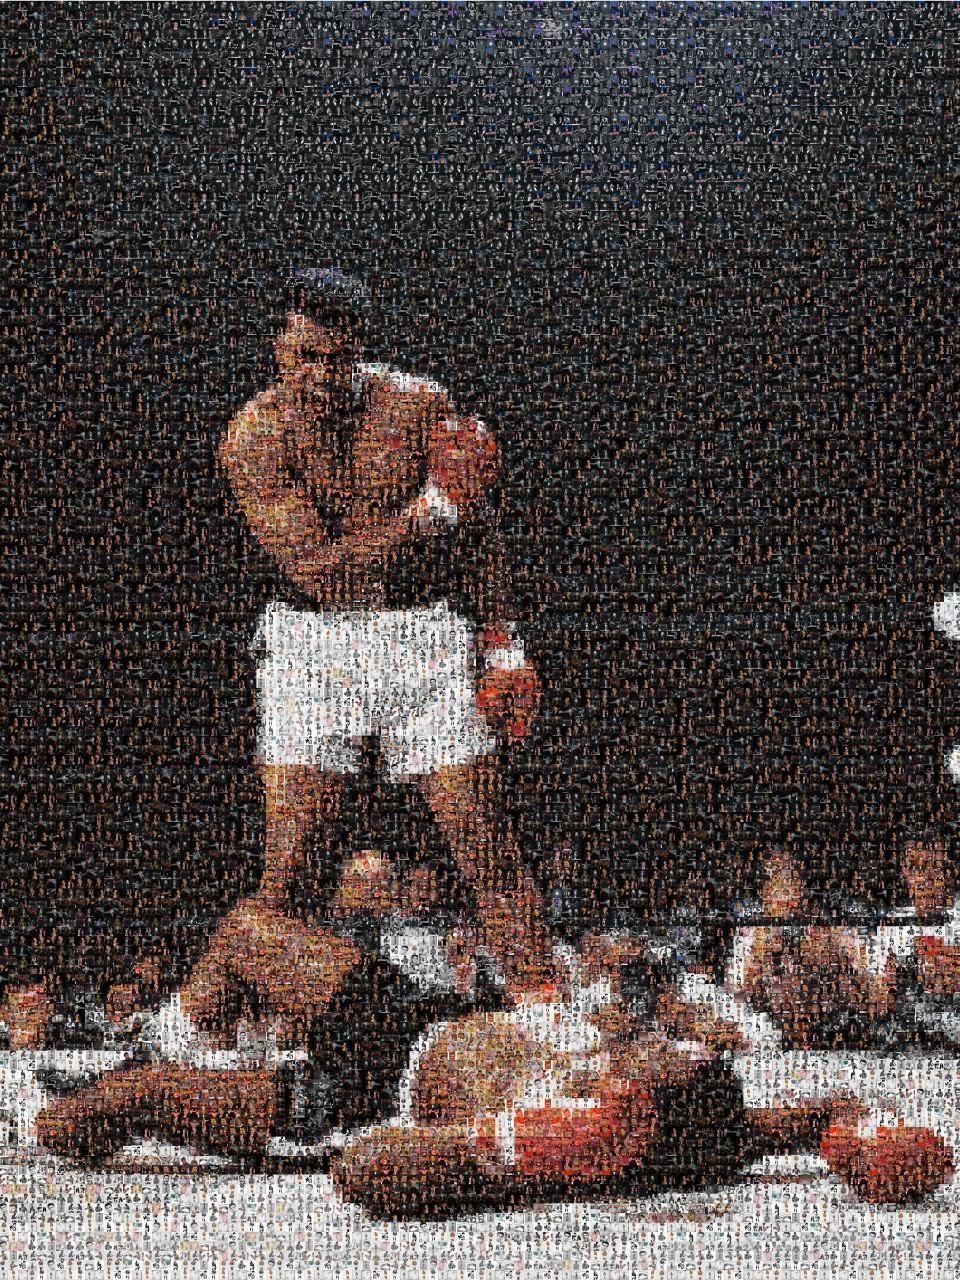 Shane Russeck Color Photograph - "Ali" Muhammad Ali Liston THE ICONS Exhibition Poster- PHOTOMOSAIC PHOTOGRAPHY 